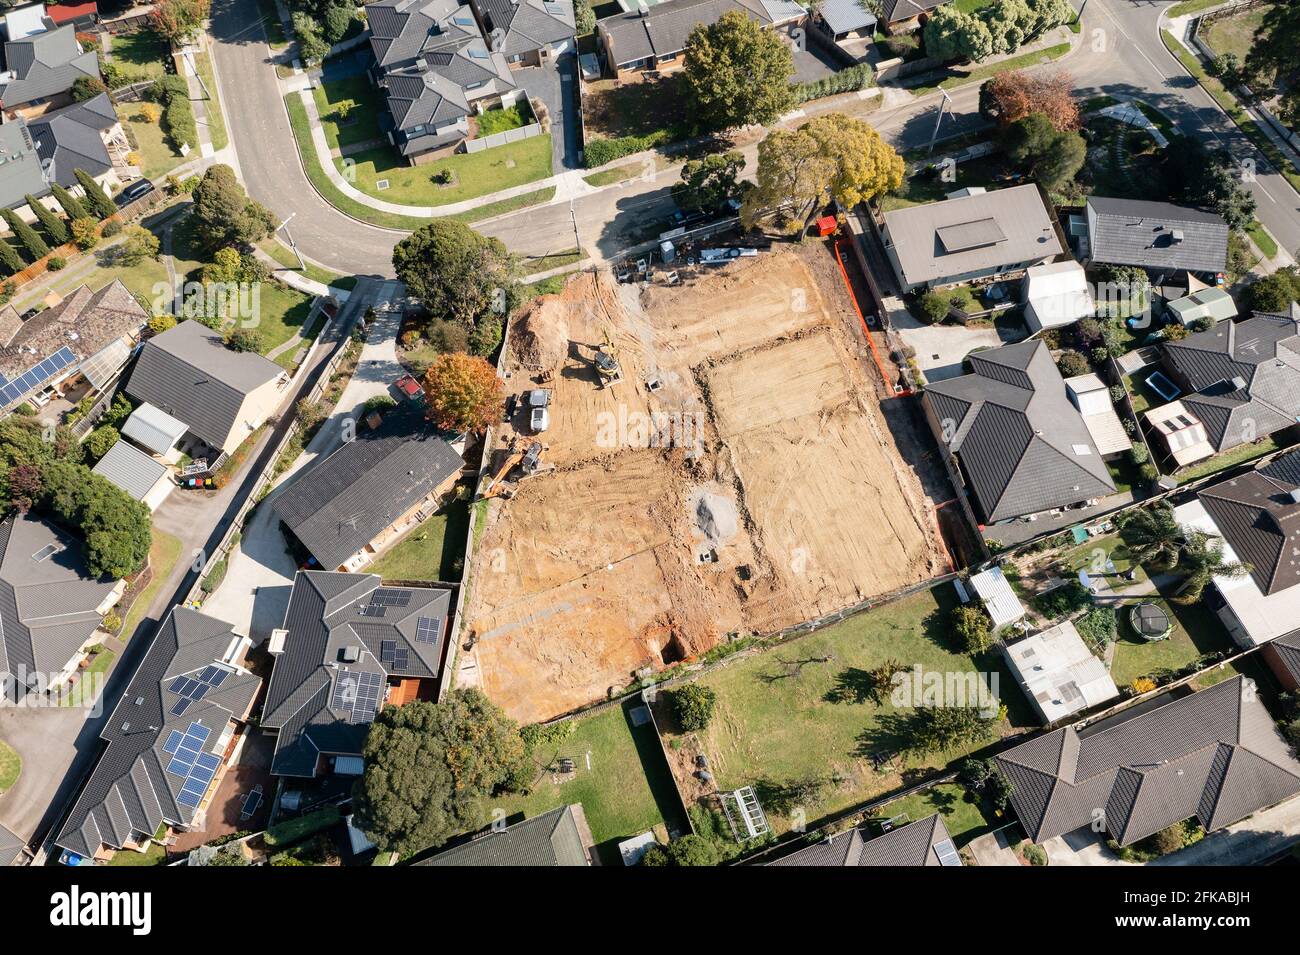 Aerial photo of vacant residential land under development in Australia Stock Photo